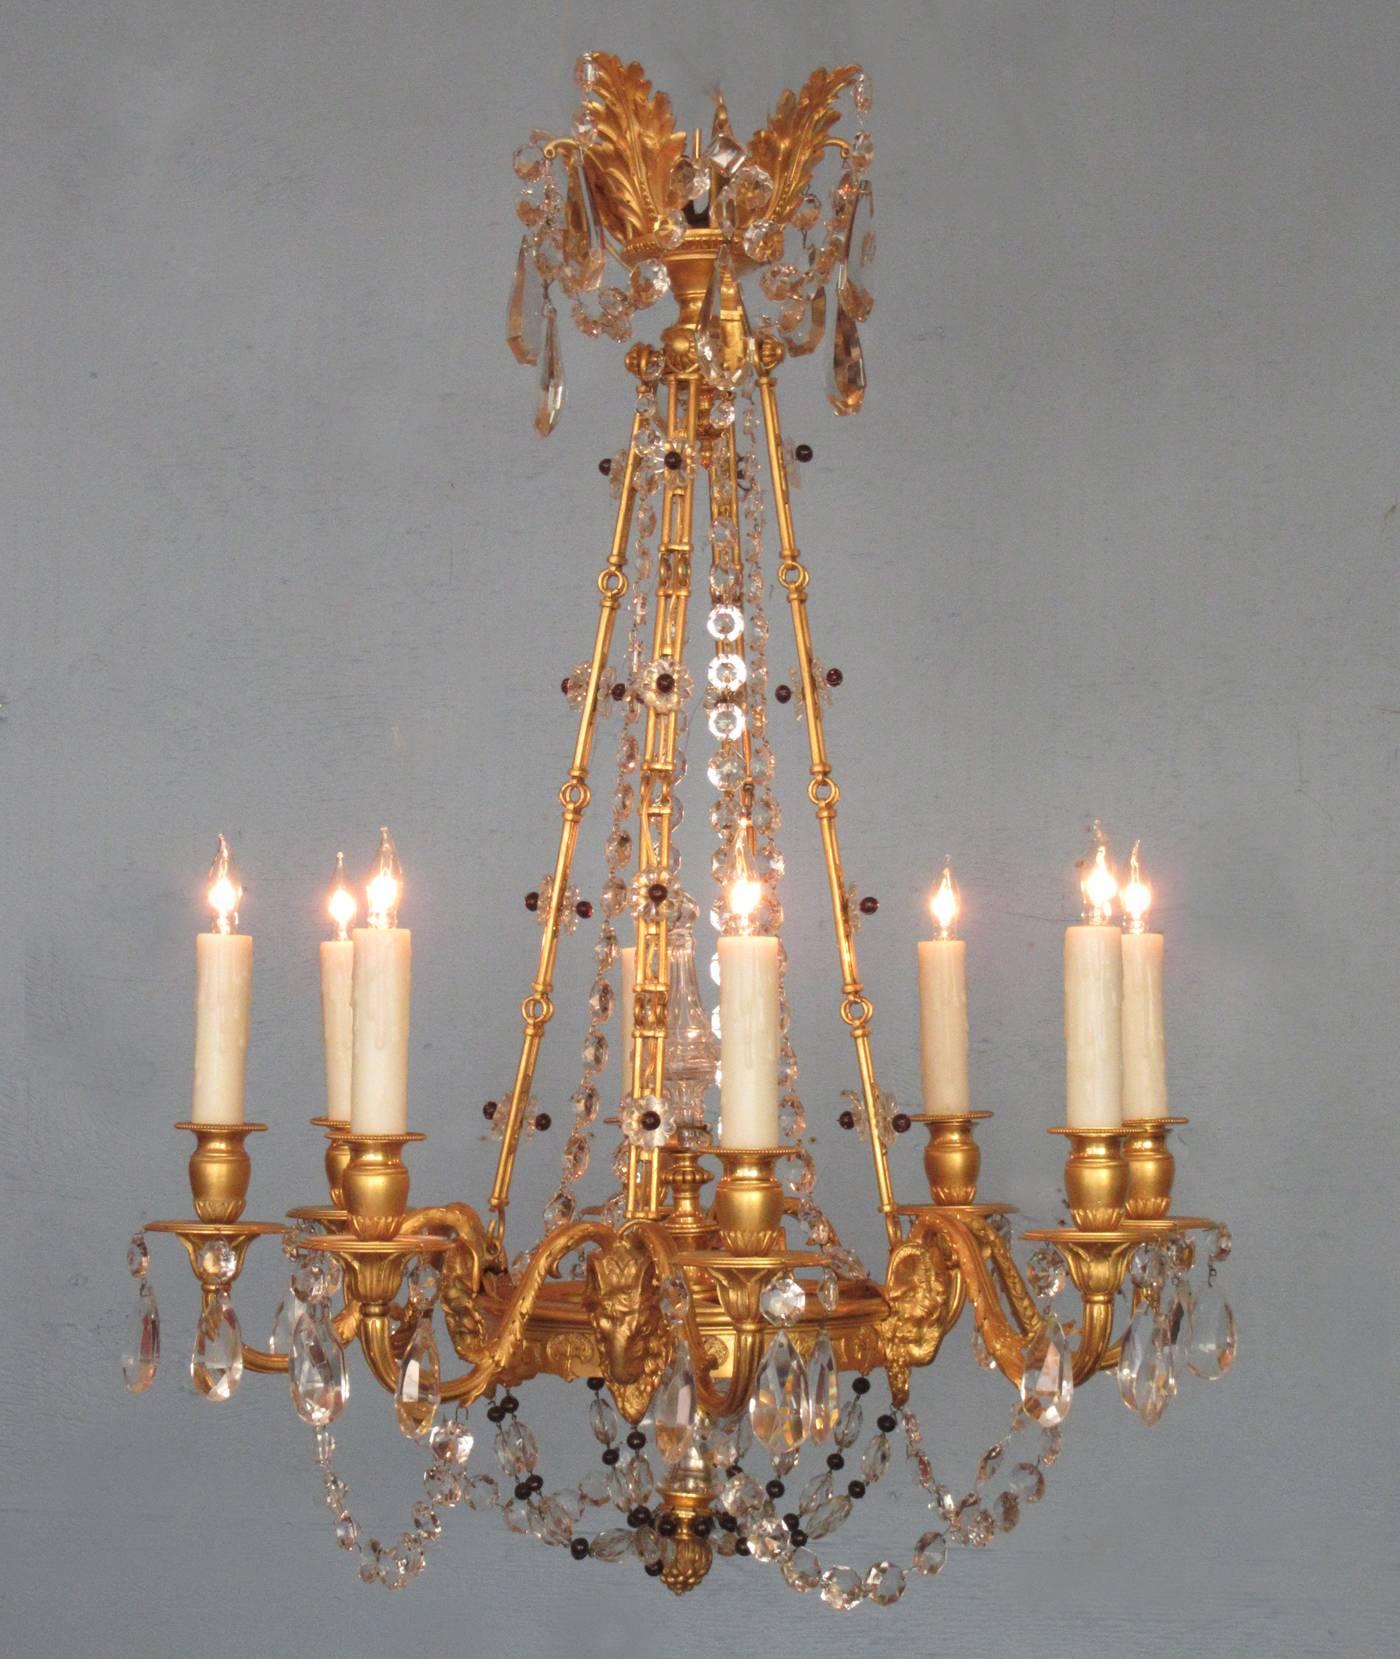 An early 20th century French Louis XIV style bronze doré chandelier, circa 1920, featuring a superbly cast bronze doré frame adorned with ram's heads and eight candle arms draped with clear cut crystal and polished amethyst beads. The chandelier was